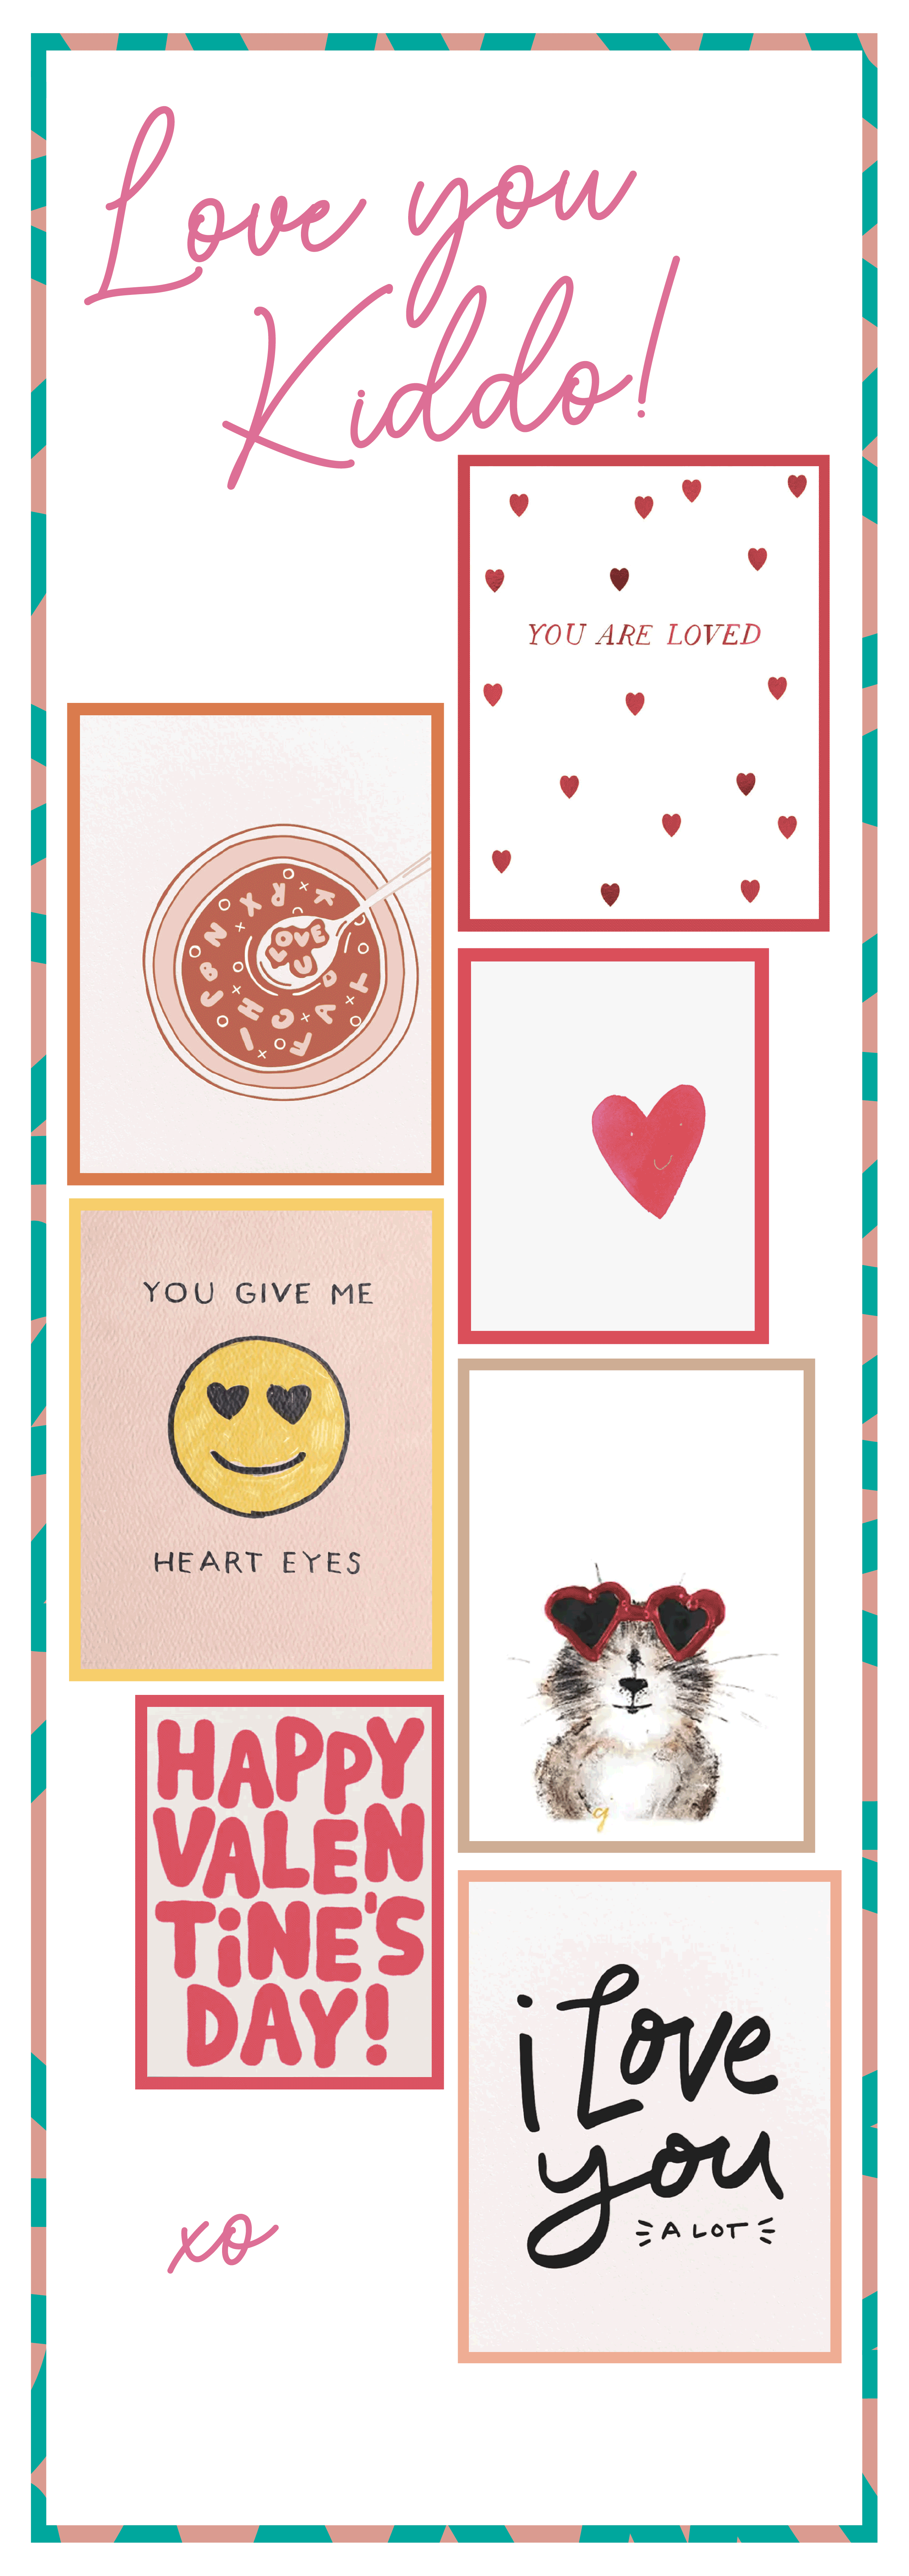 urbanic paper boutique los angeles california gifts stationery greeting cards valentines galentines vday love friendship romance heart kids littles family kiddos children